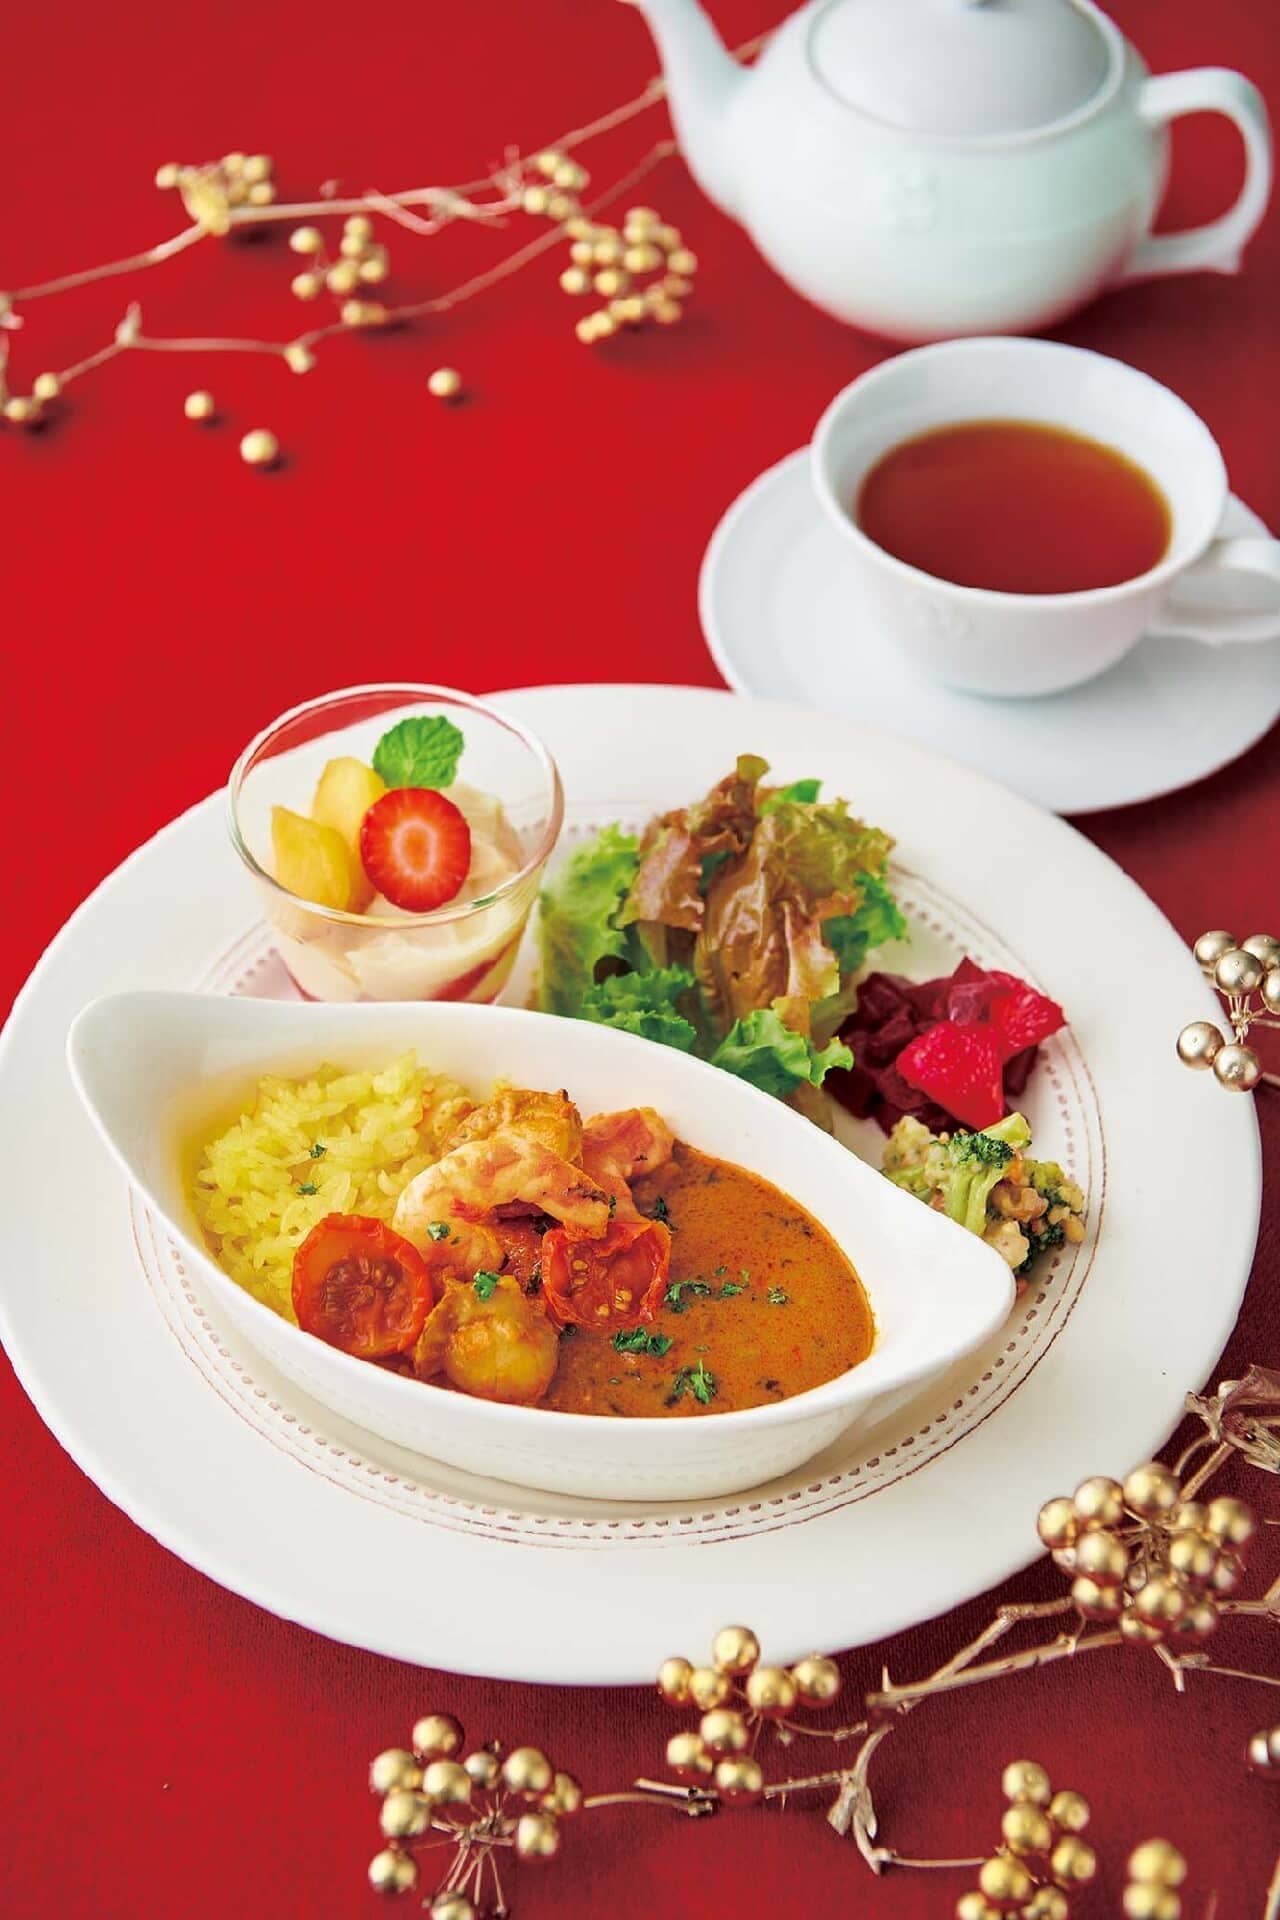 Afternoon Tea Tea Room "Shrimp and Scallop Tomato Curry Plate"